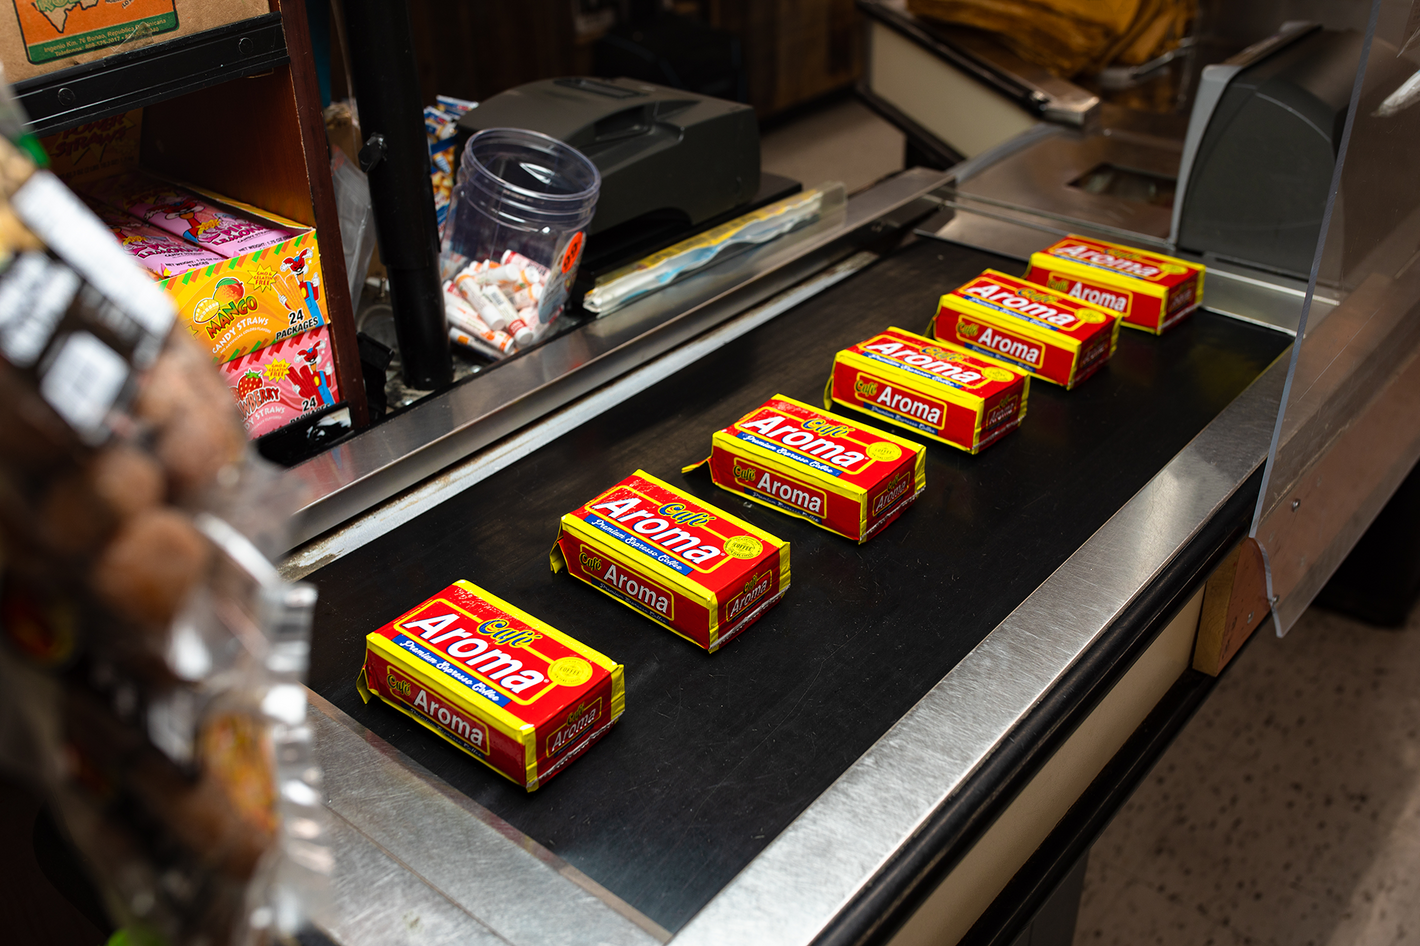 Cafe Aroma coffee blocks on conveyor belt in grocery store 